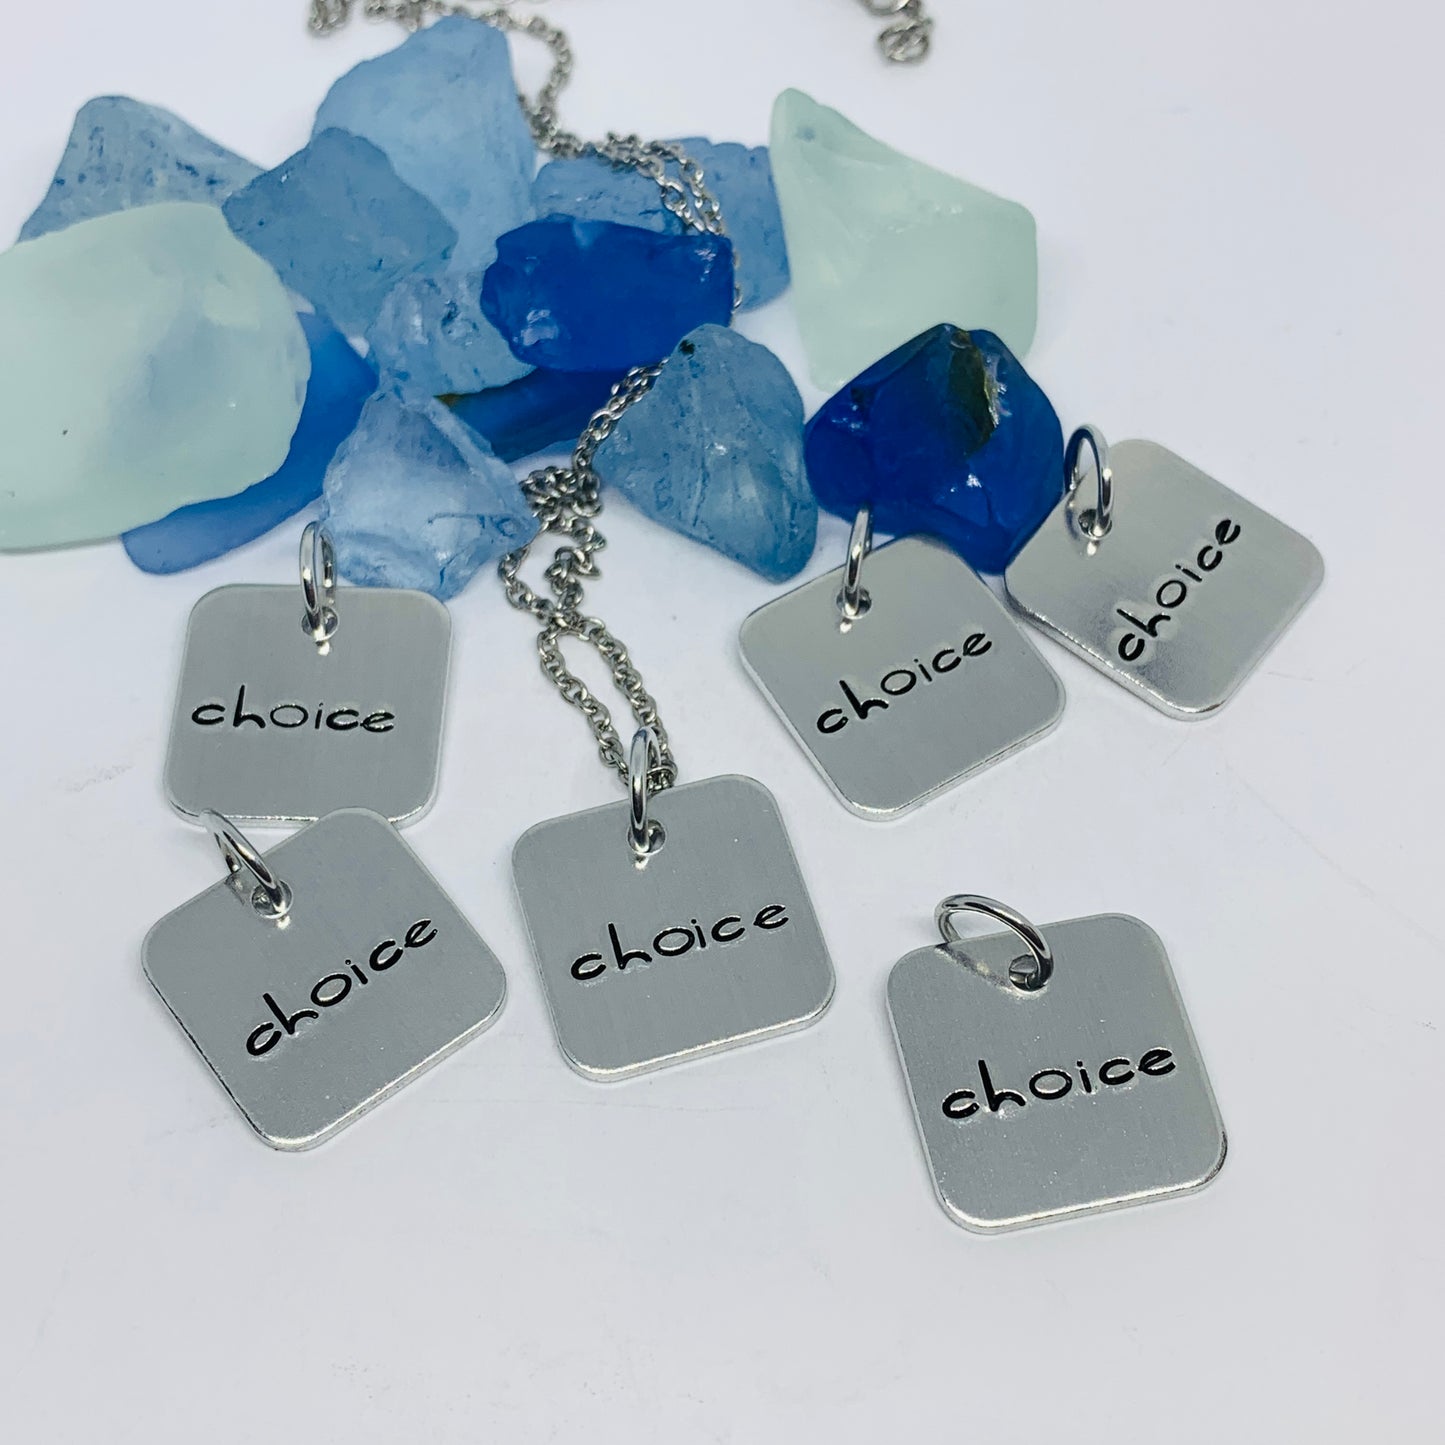 Choice - Hand Stamped Necklace | Pro Choice | Woman’s Rights